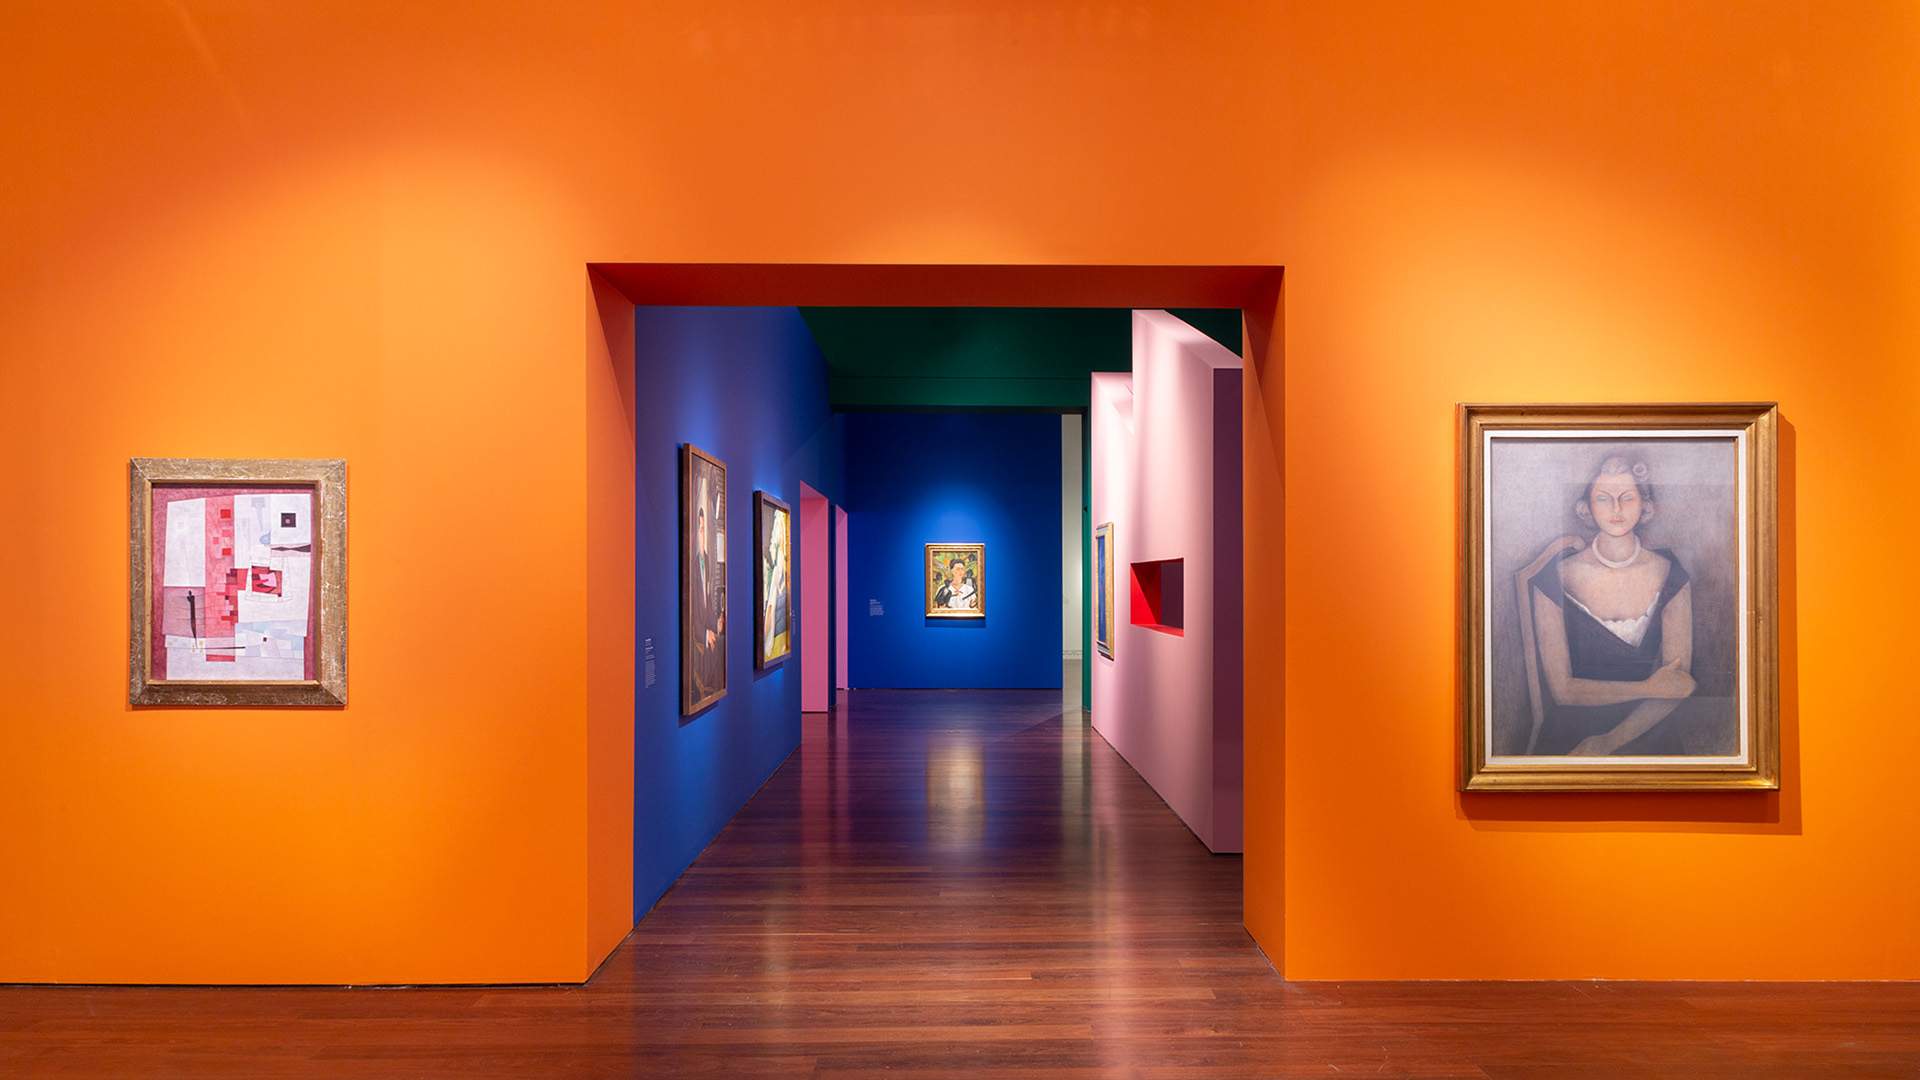 Now Open: A Stunning Frida Kahlo, Diego Rivera and Mexican Modernism Exhibition Has Arrived in Australia